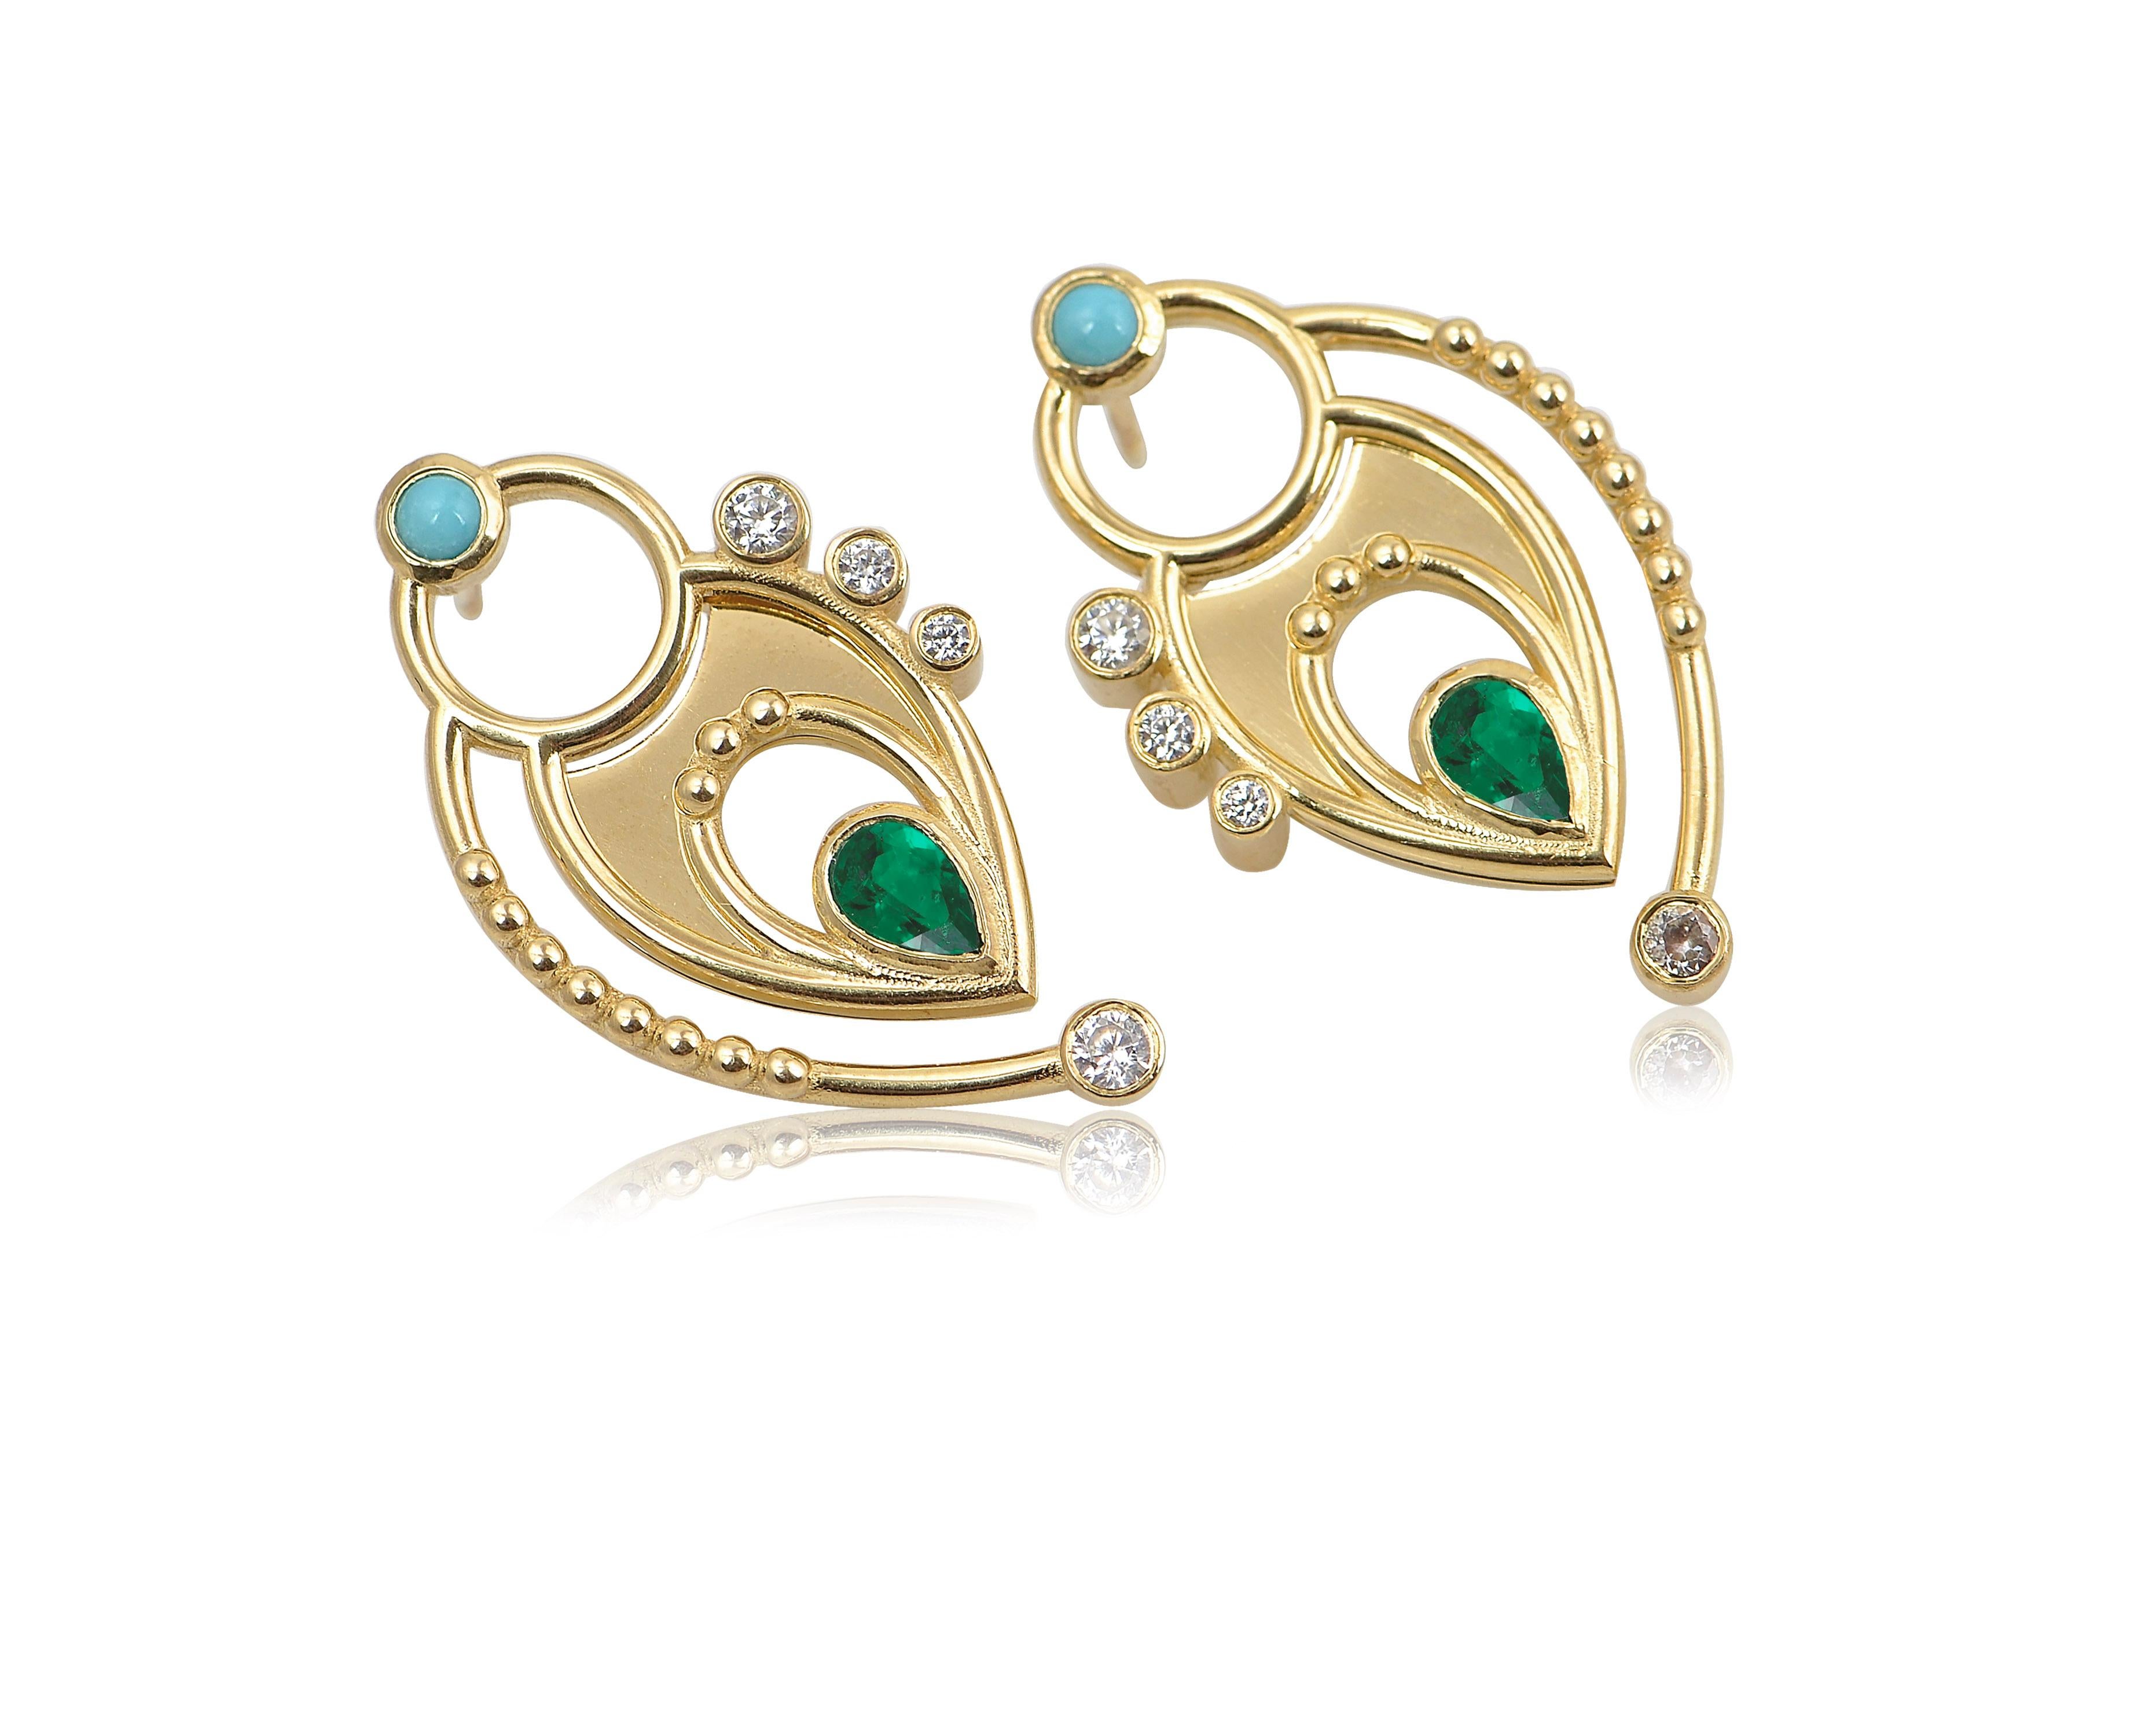 Contemporary Pear Shaped Earrings in 18 Karat Yellow Gold with Diamonds, Emeralds, Turquoise For Sale